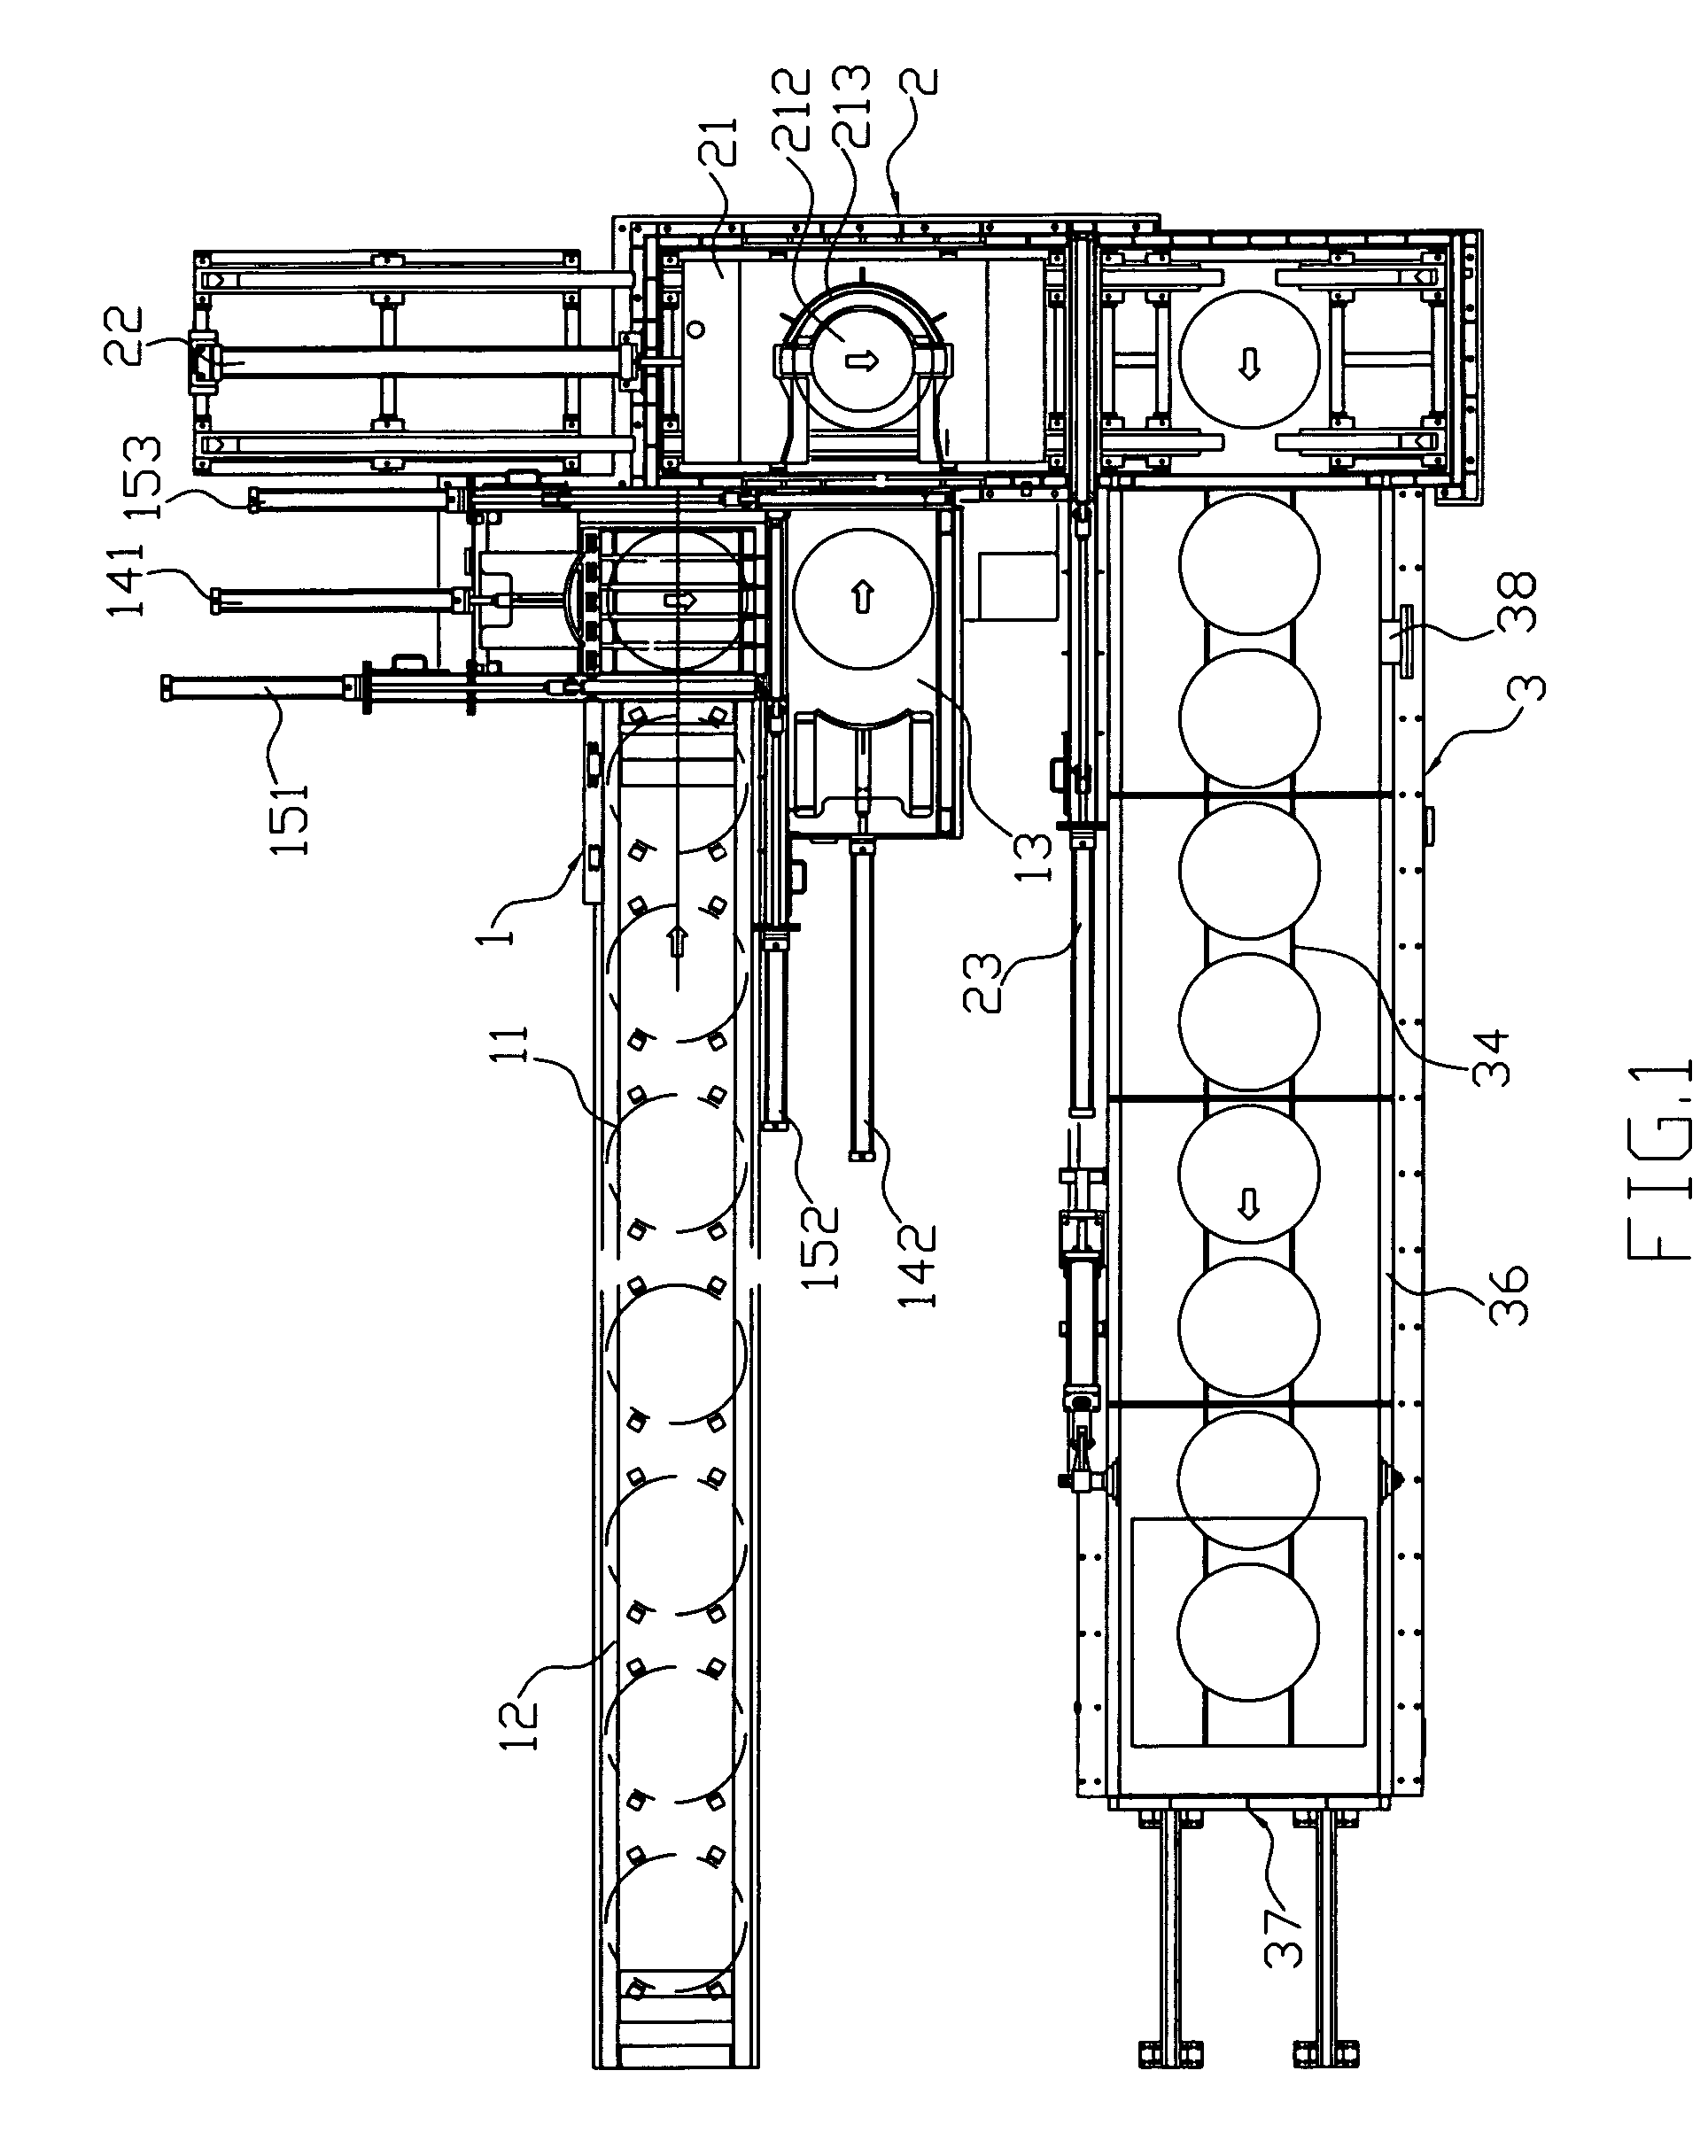 Transporting and cooling device for plasma lava